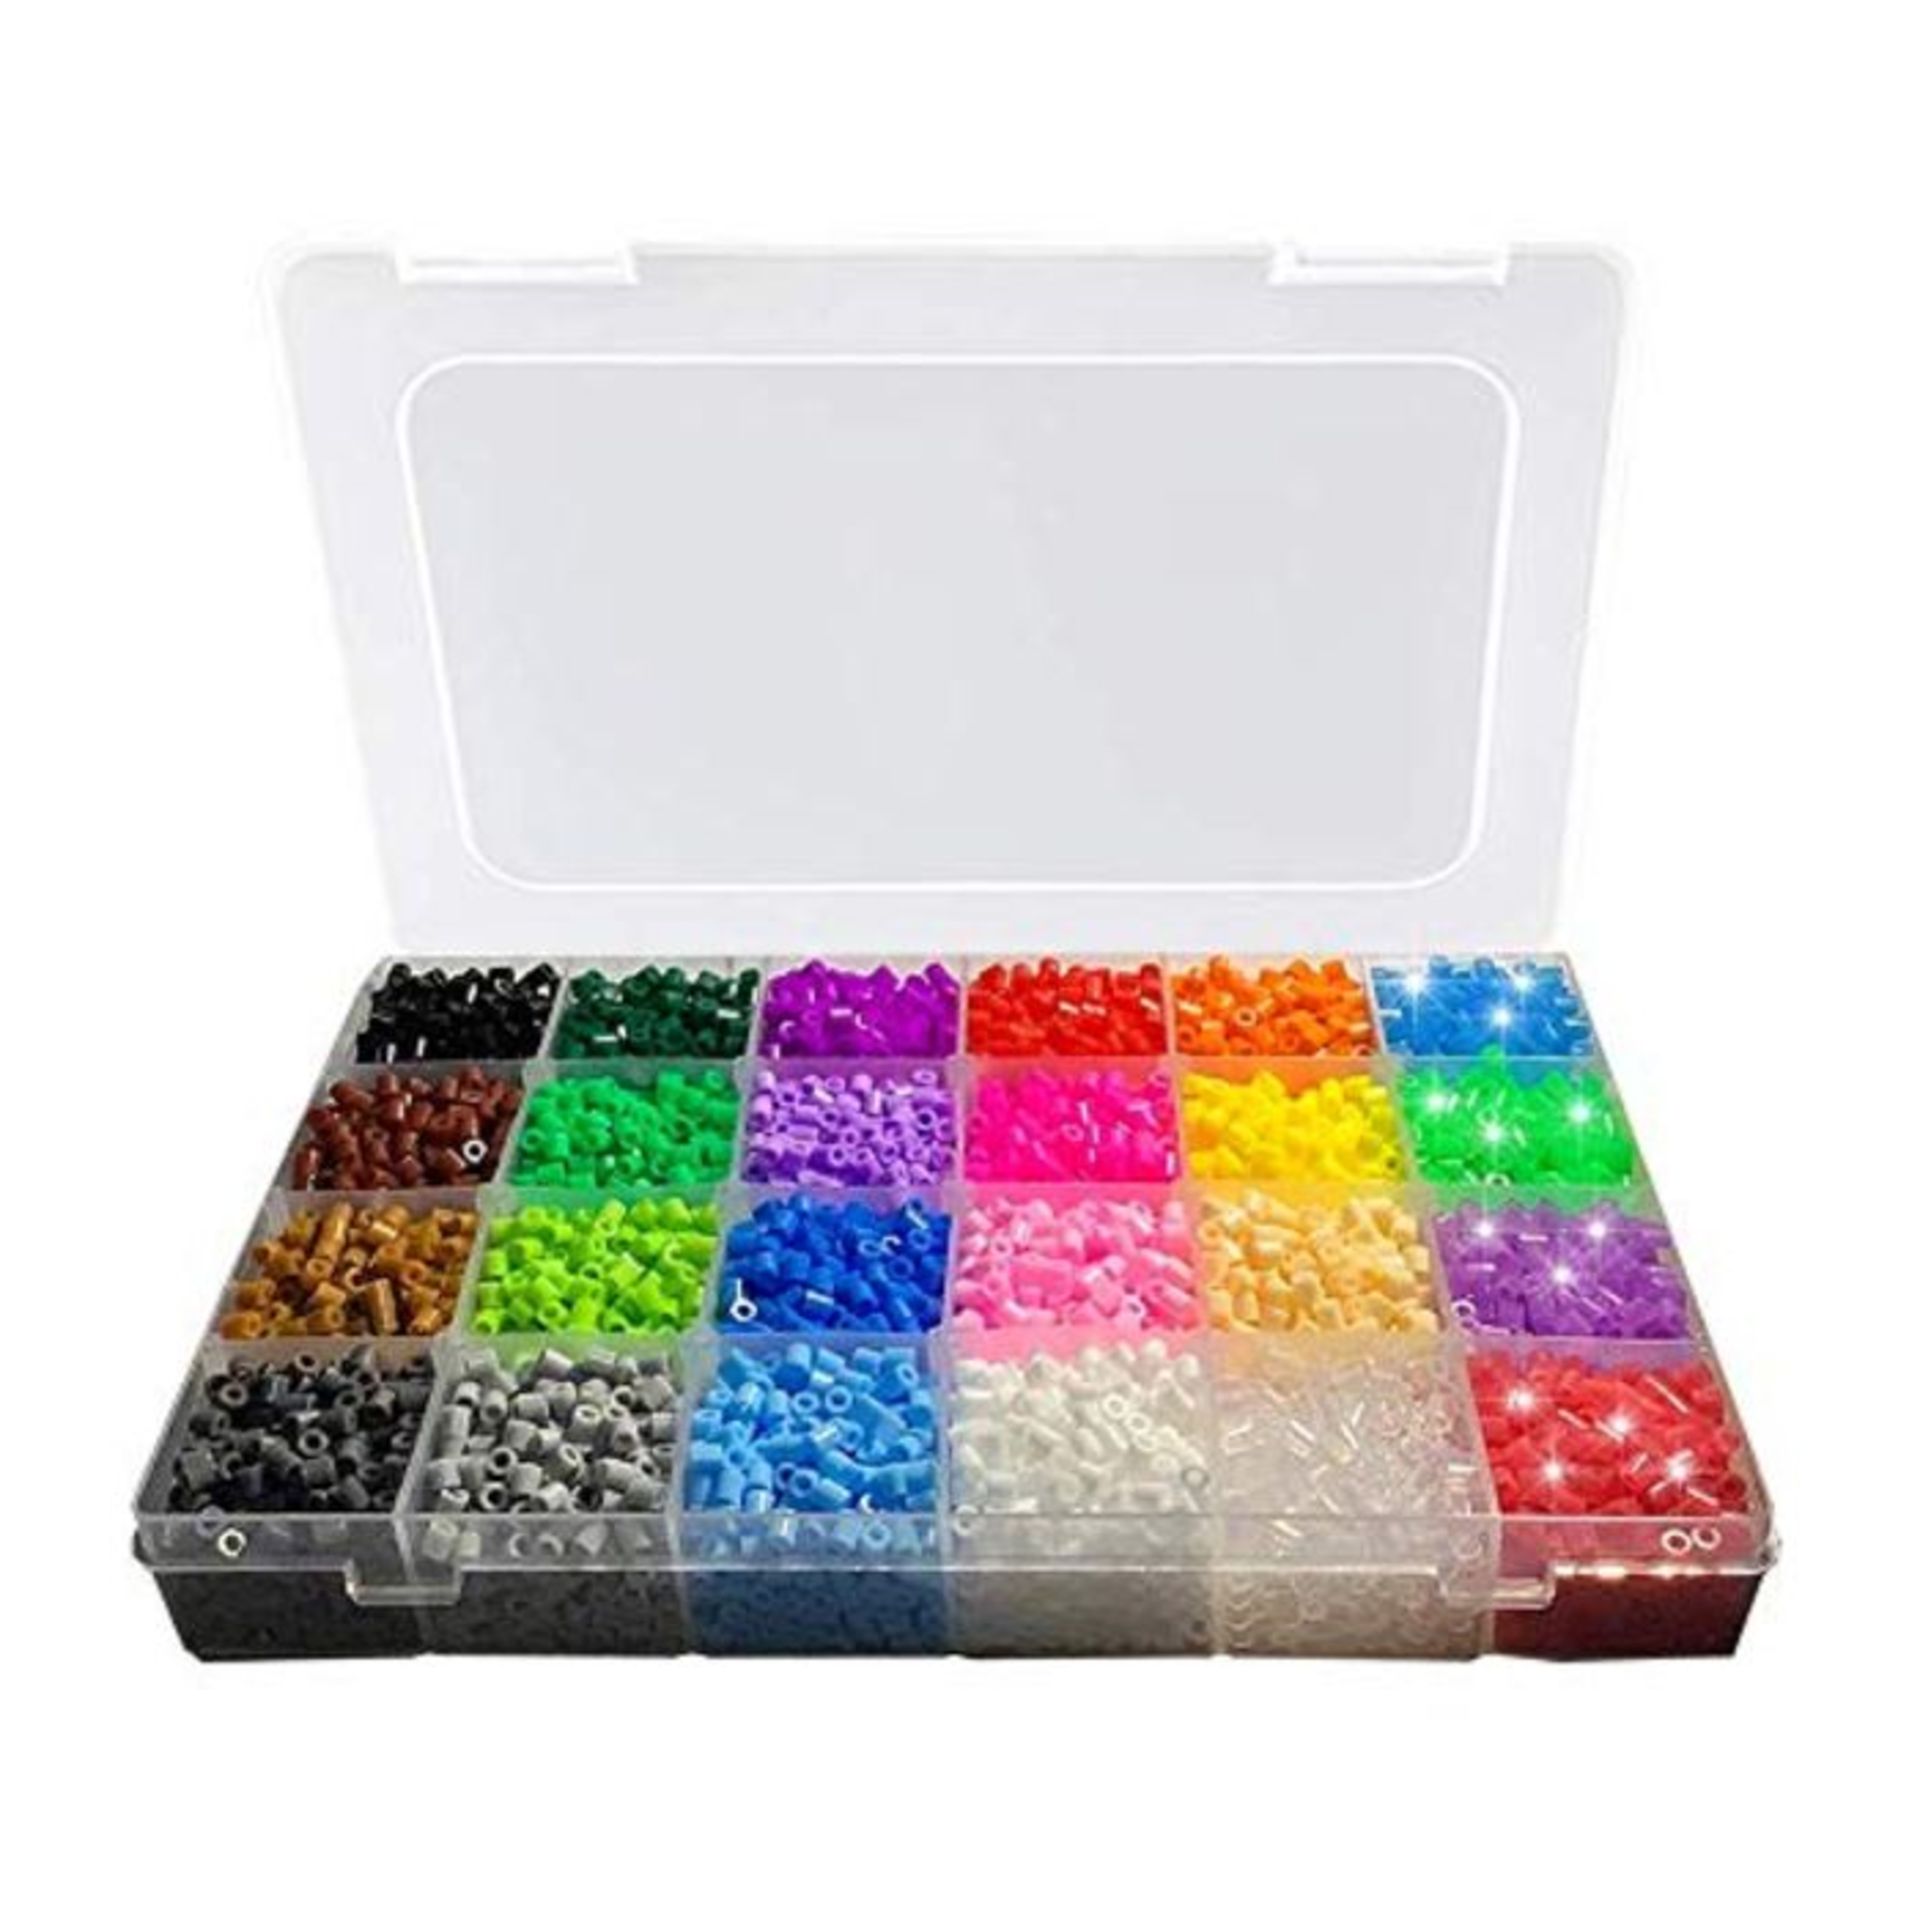 11000 Refill Packs for Ironing Beads, 24 Colours - 5 mm Plug-In Bead Set (including 4